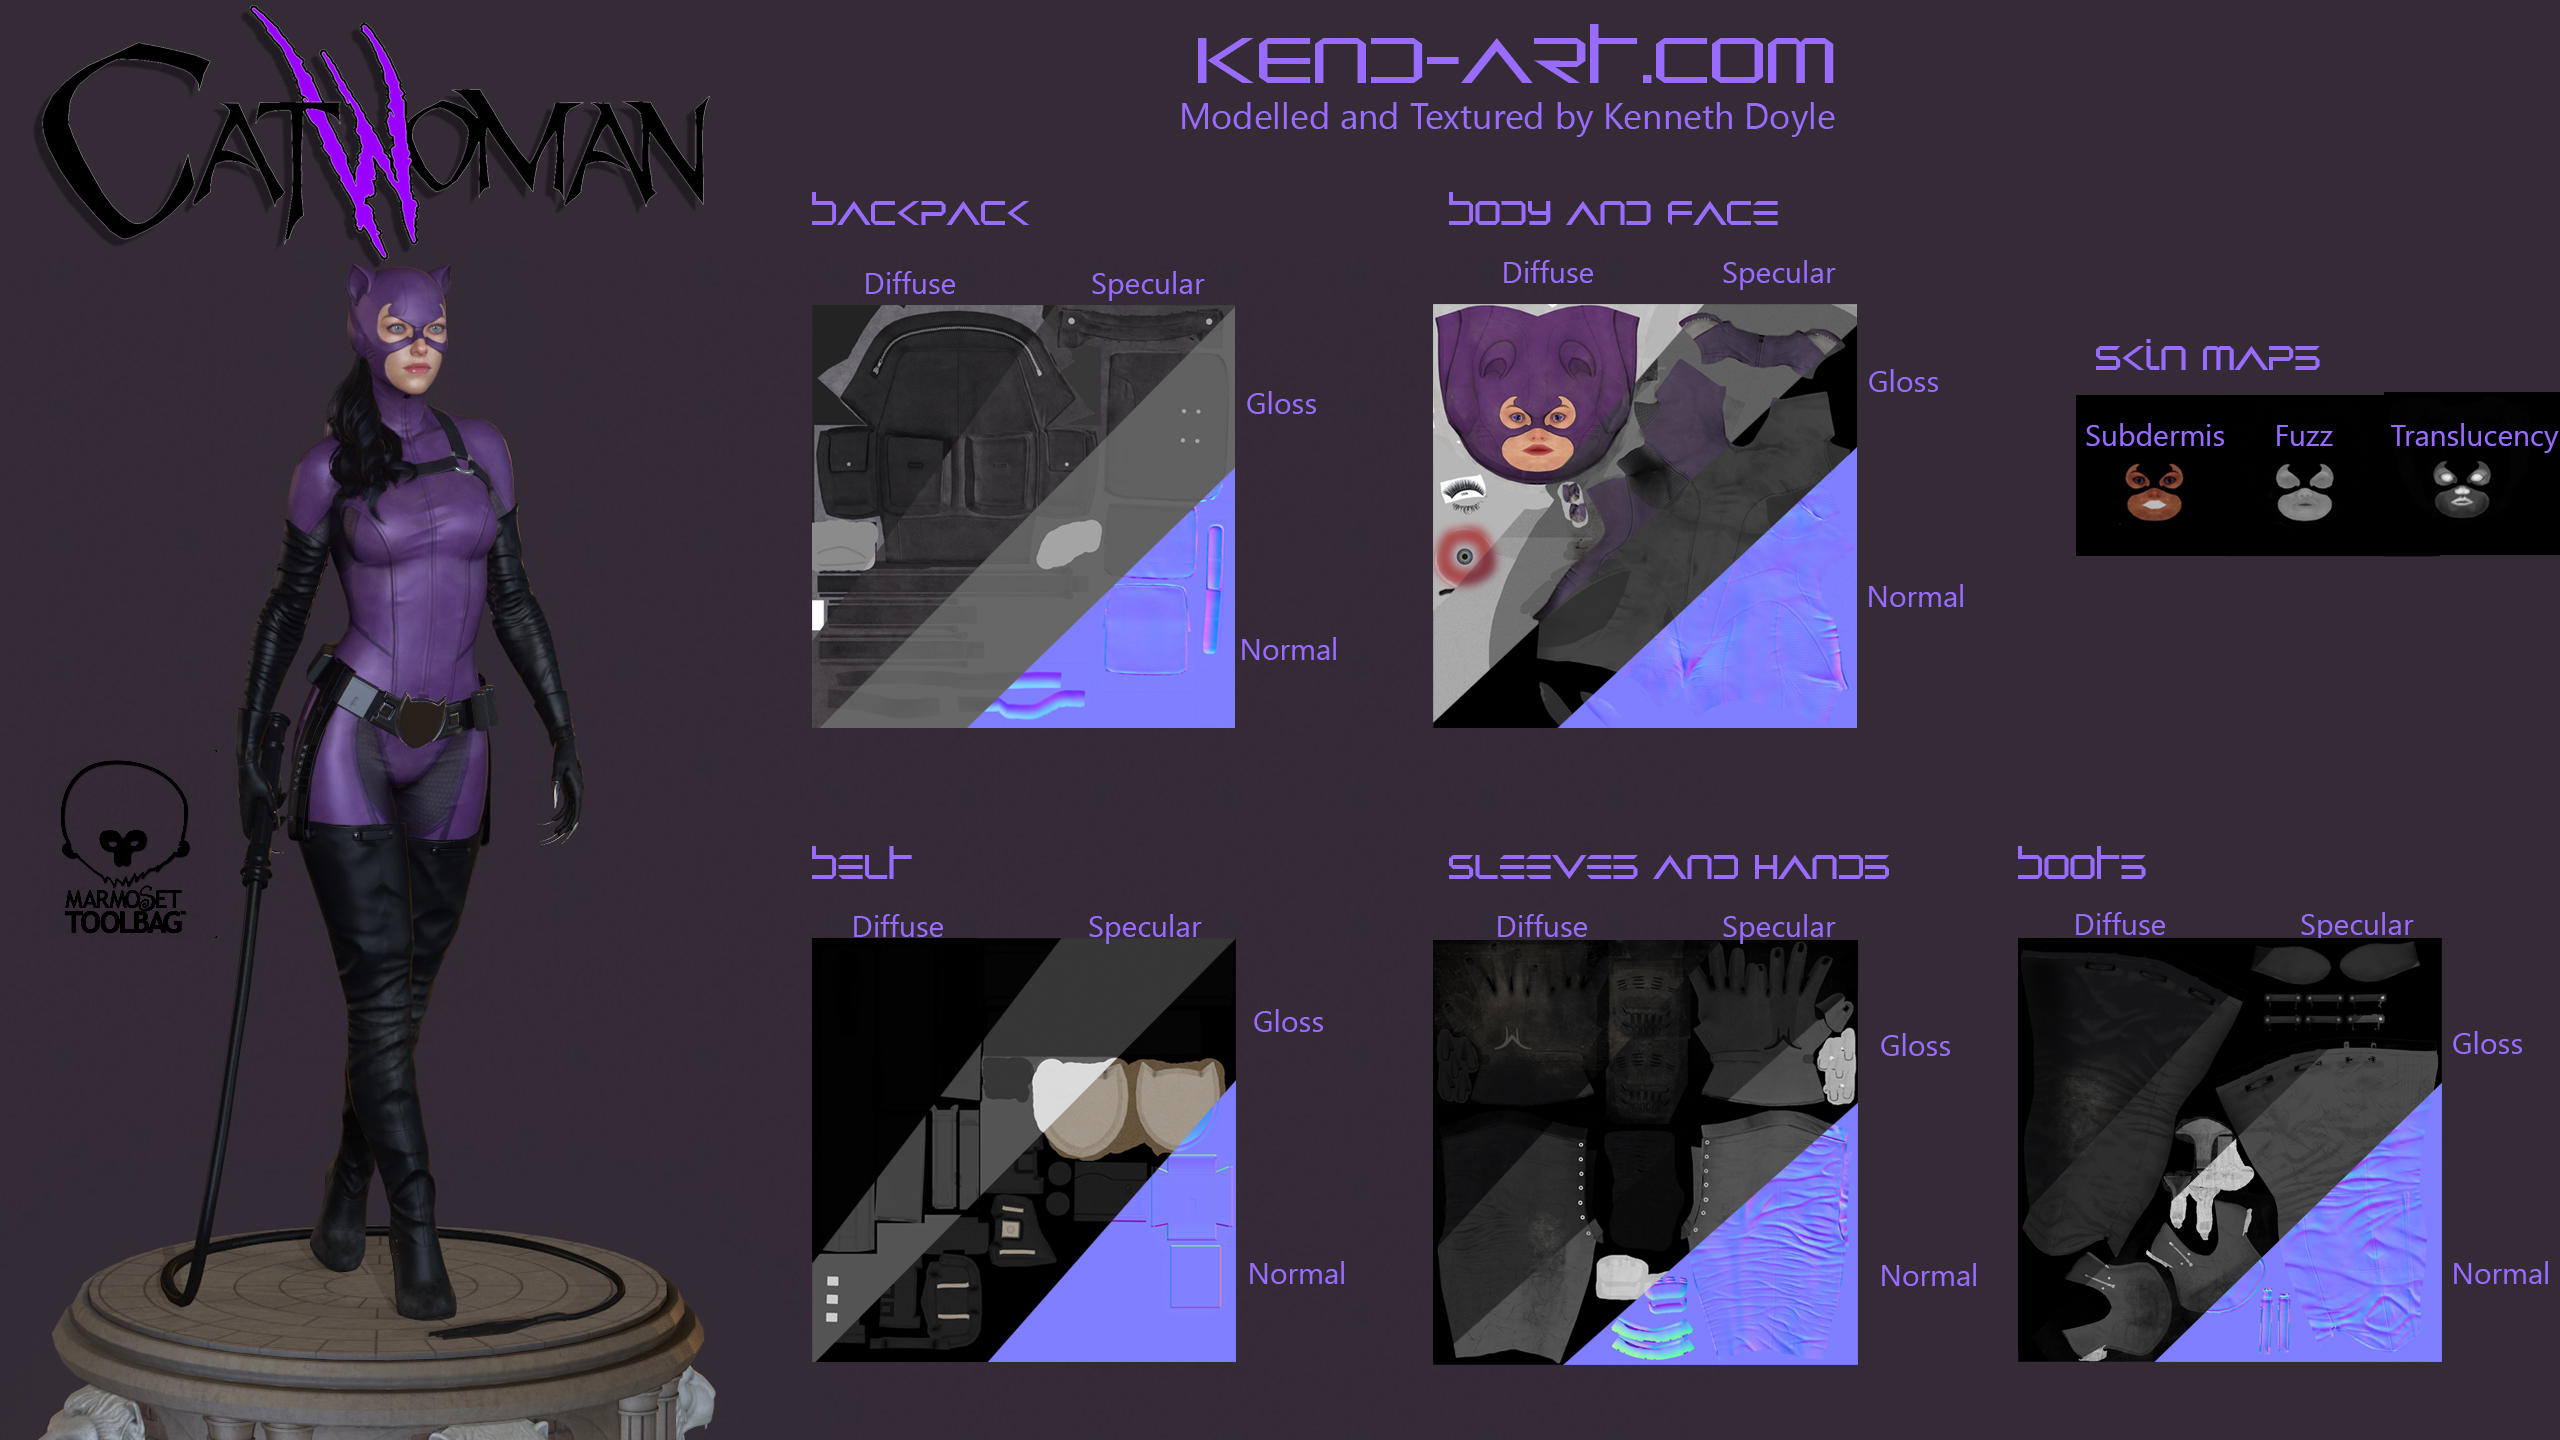 catwoman___texture_maps_by_kdoyle9-d7vpg8x.jpg